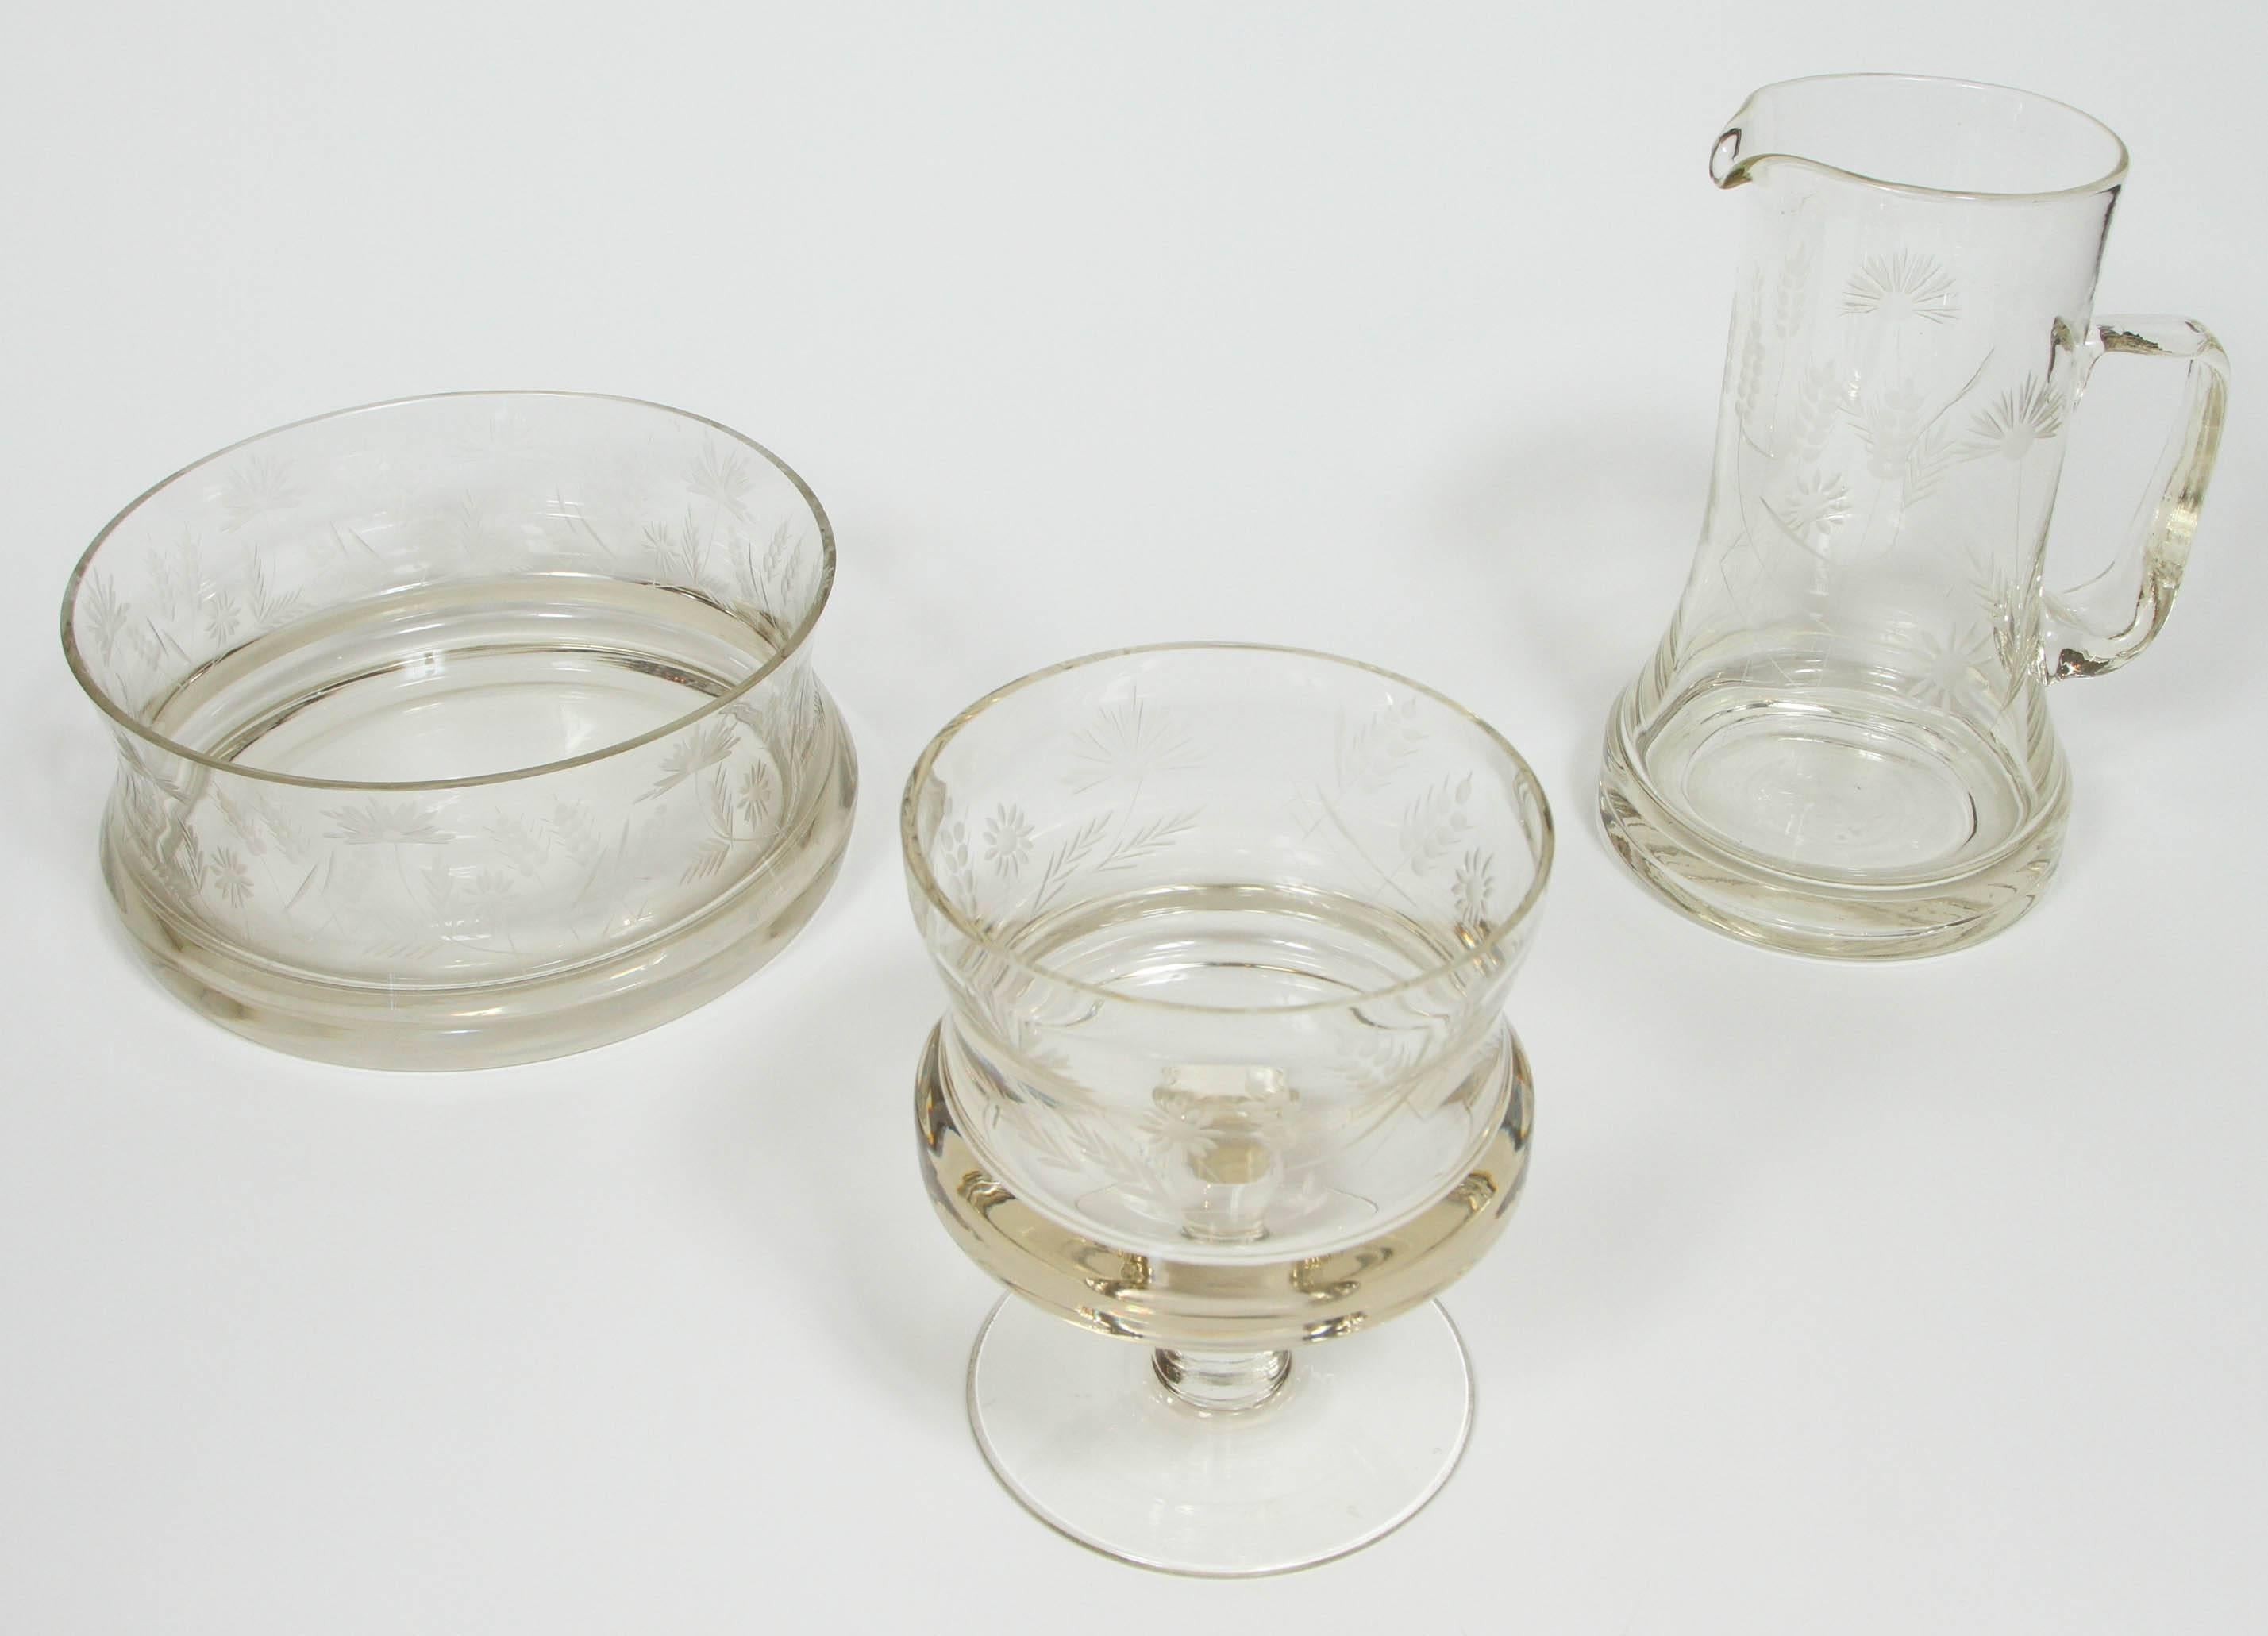 Set of 3 Victorian glass serving pieces with etched thistle pattern. Includes bowl, footed compote, and pitcher.